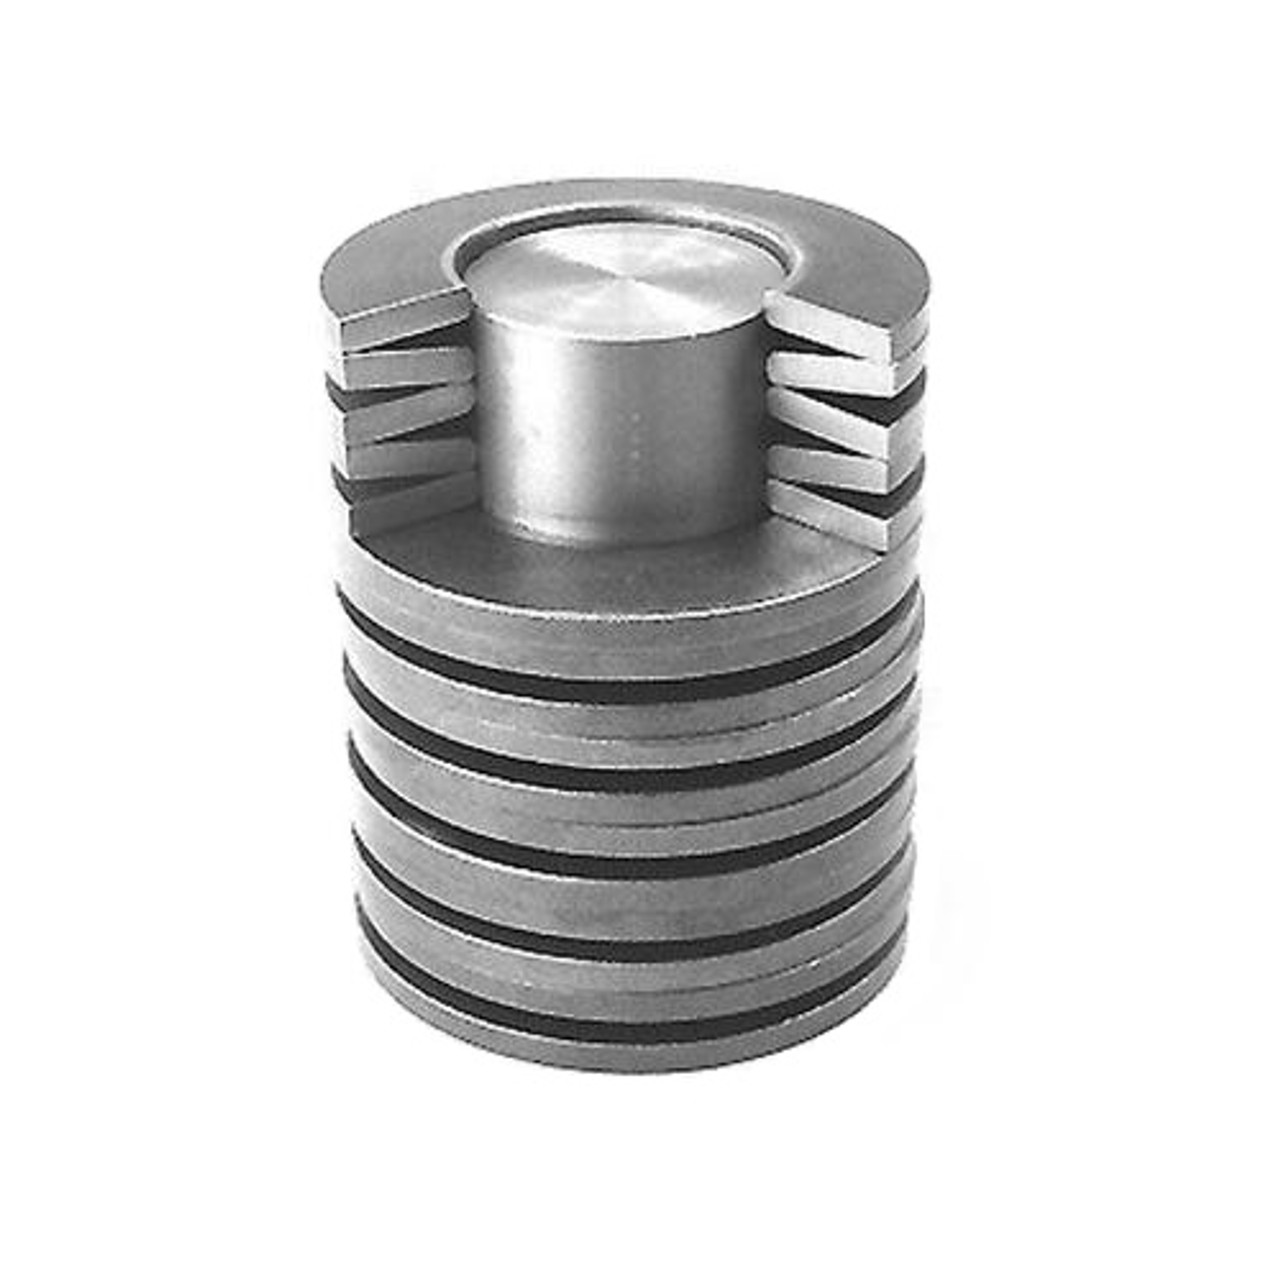 4mm Disc Spring (DIN 2093) Conical Washer  DS004.2-012-06